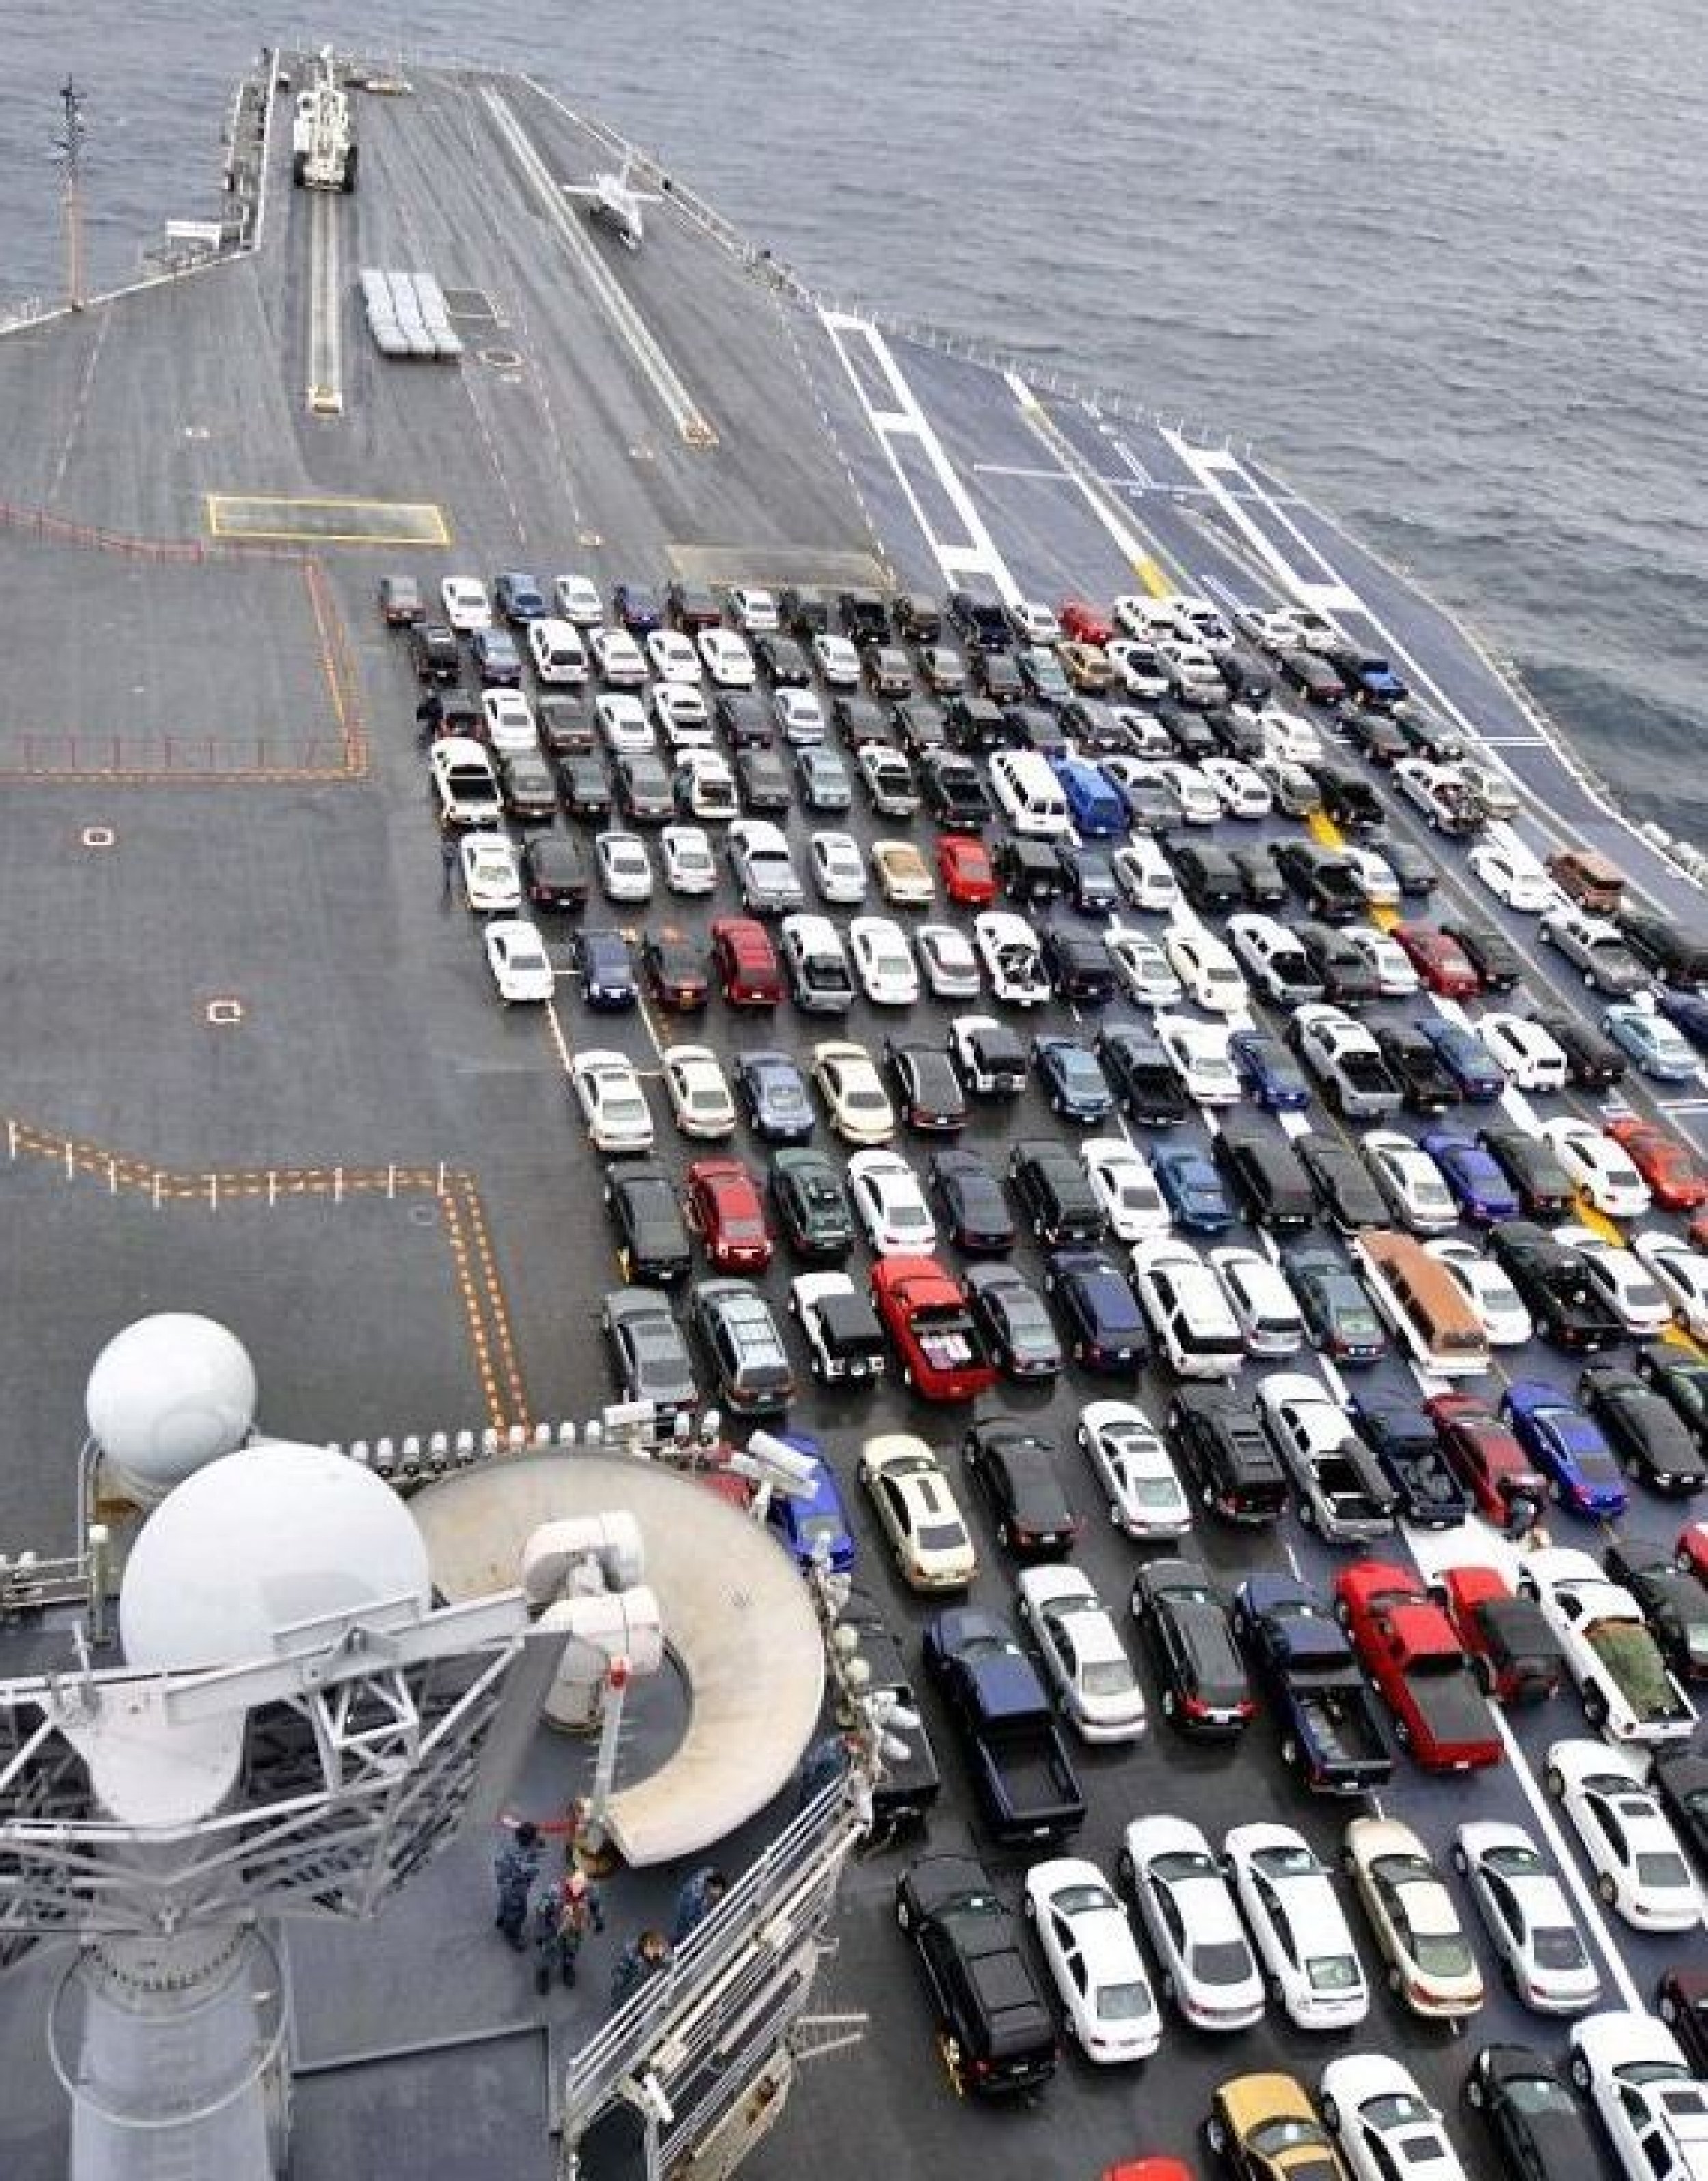 The Worlds Most Expensive Parking Lot is in the Middle of the Ocean